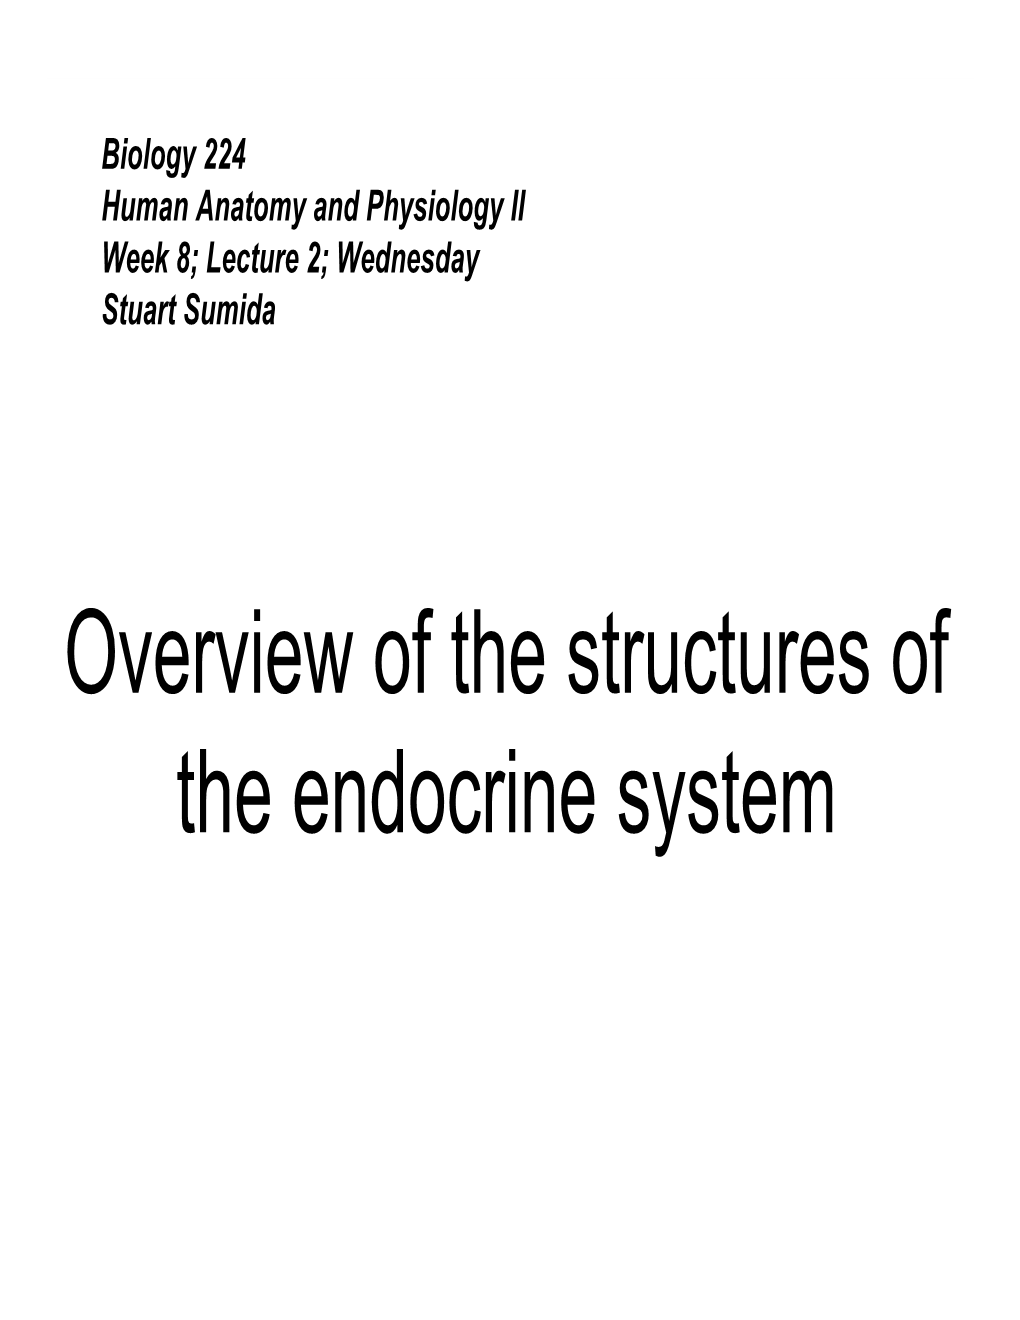 Overview of the Structures of the Endocrine System WHAT I EXPECT YOU to KNOW ABOUT EVERY ENDOCRINE STRUCTURE